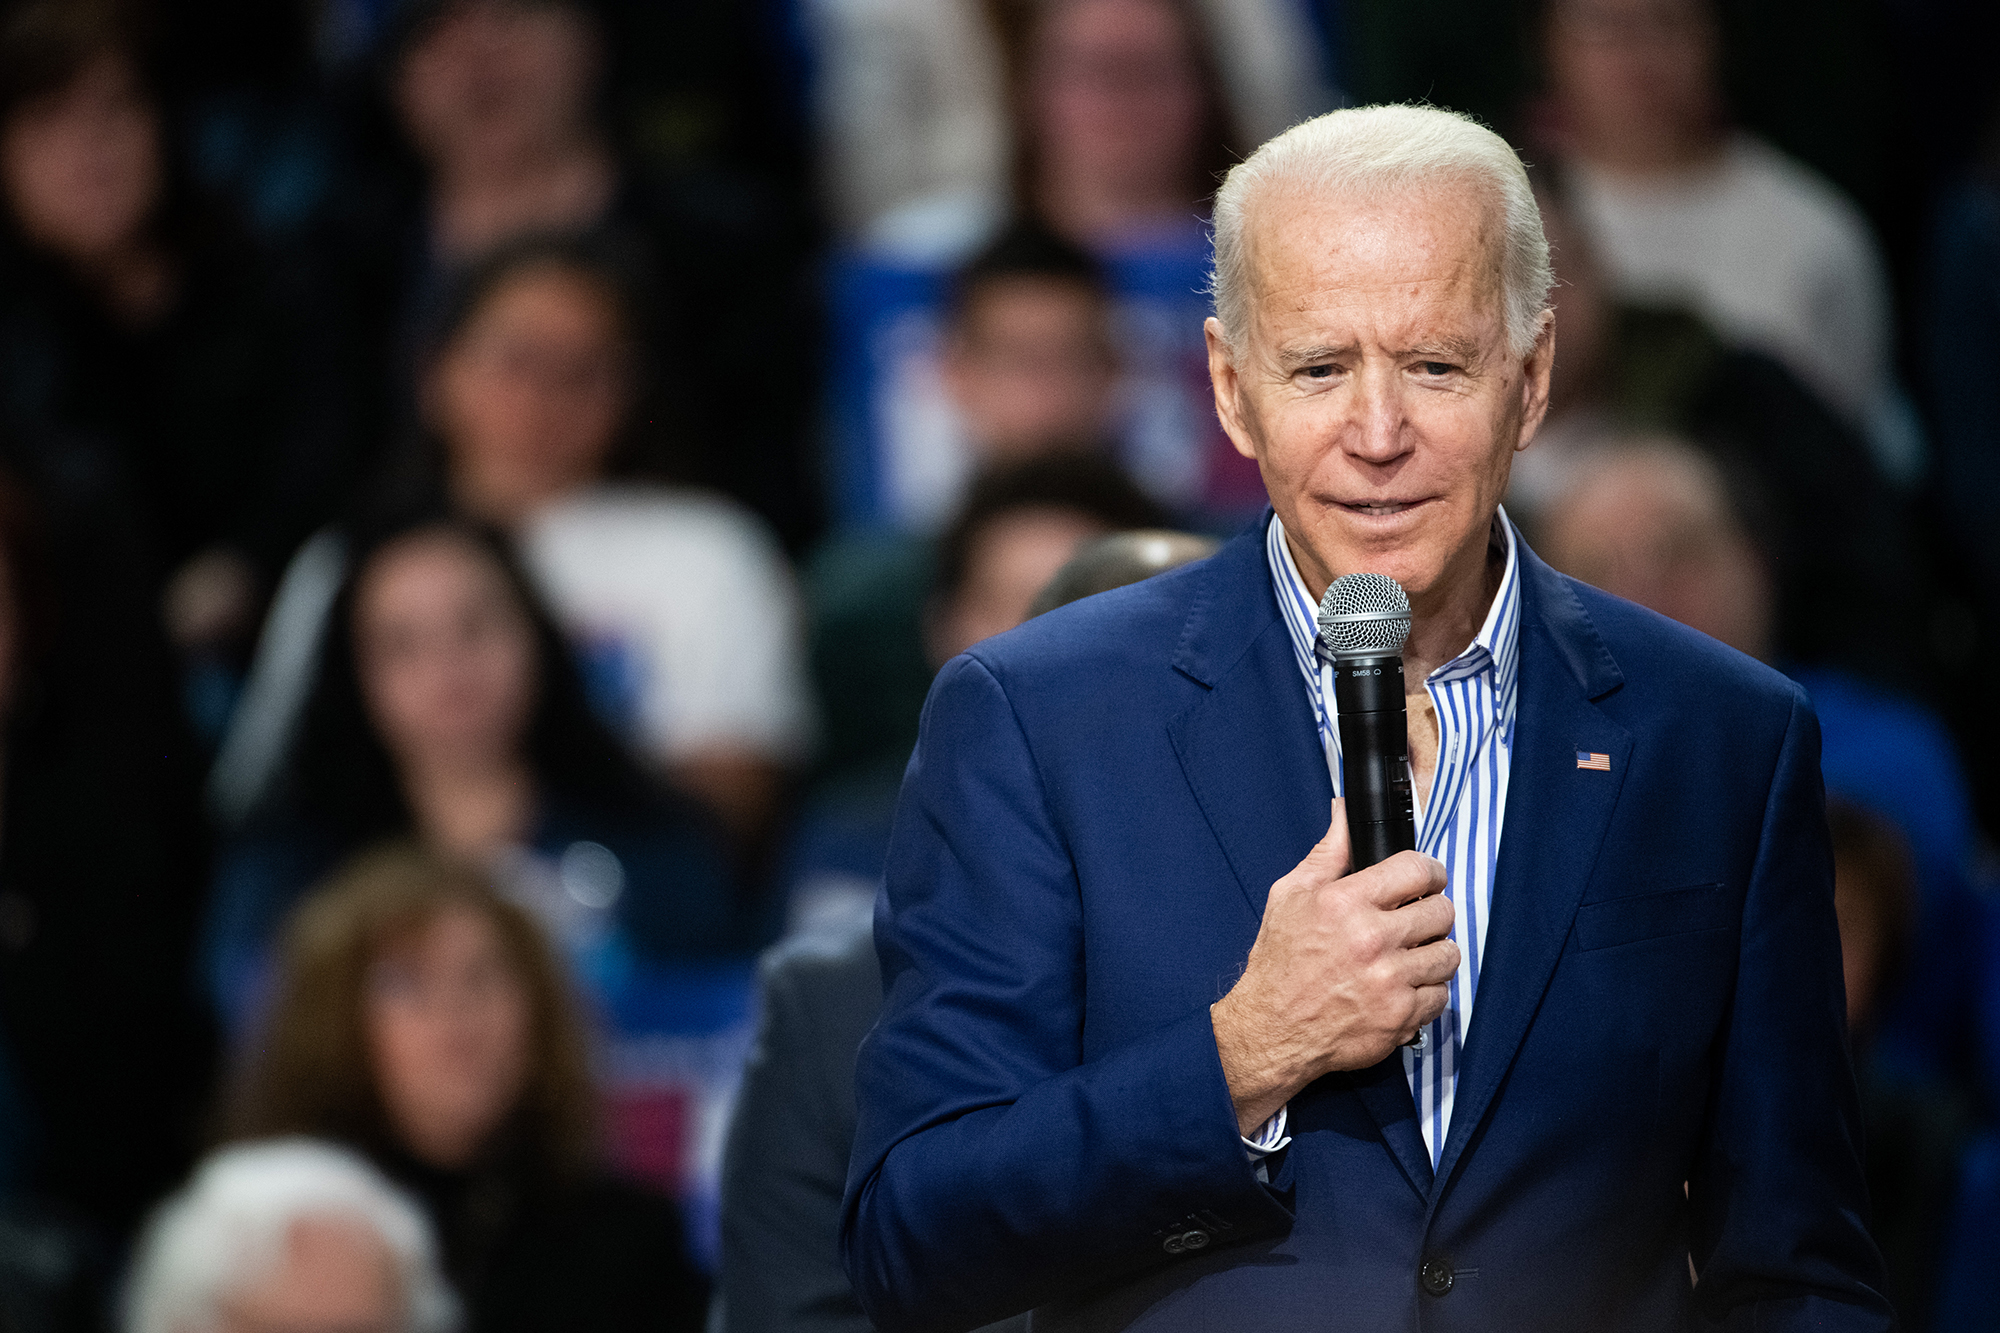 Democratic presidential candidate former Vice President Joe Biden addresses a crowd during a campaign event at Wofford University February 28 in Spartanburg, South Carolina. 